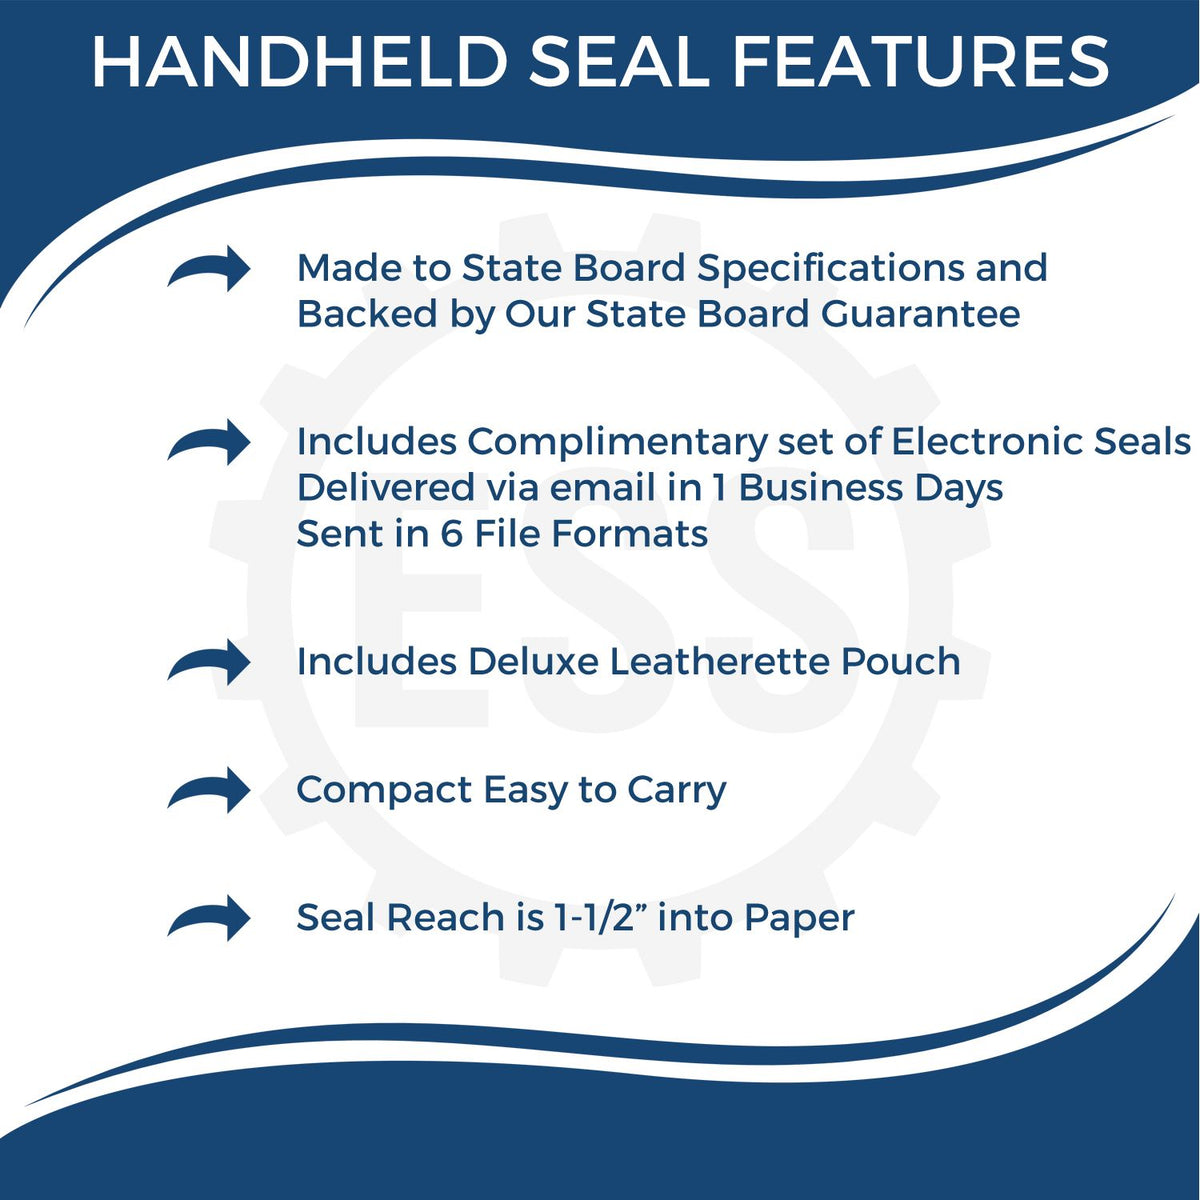 A picture of an infographic highlighting the selling points for the Handheld Mississippi Land Surveyor Seal